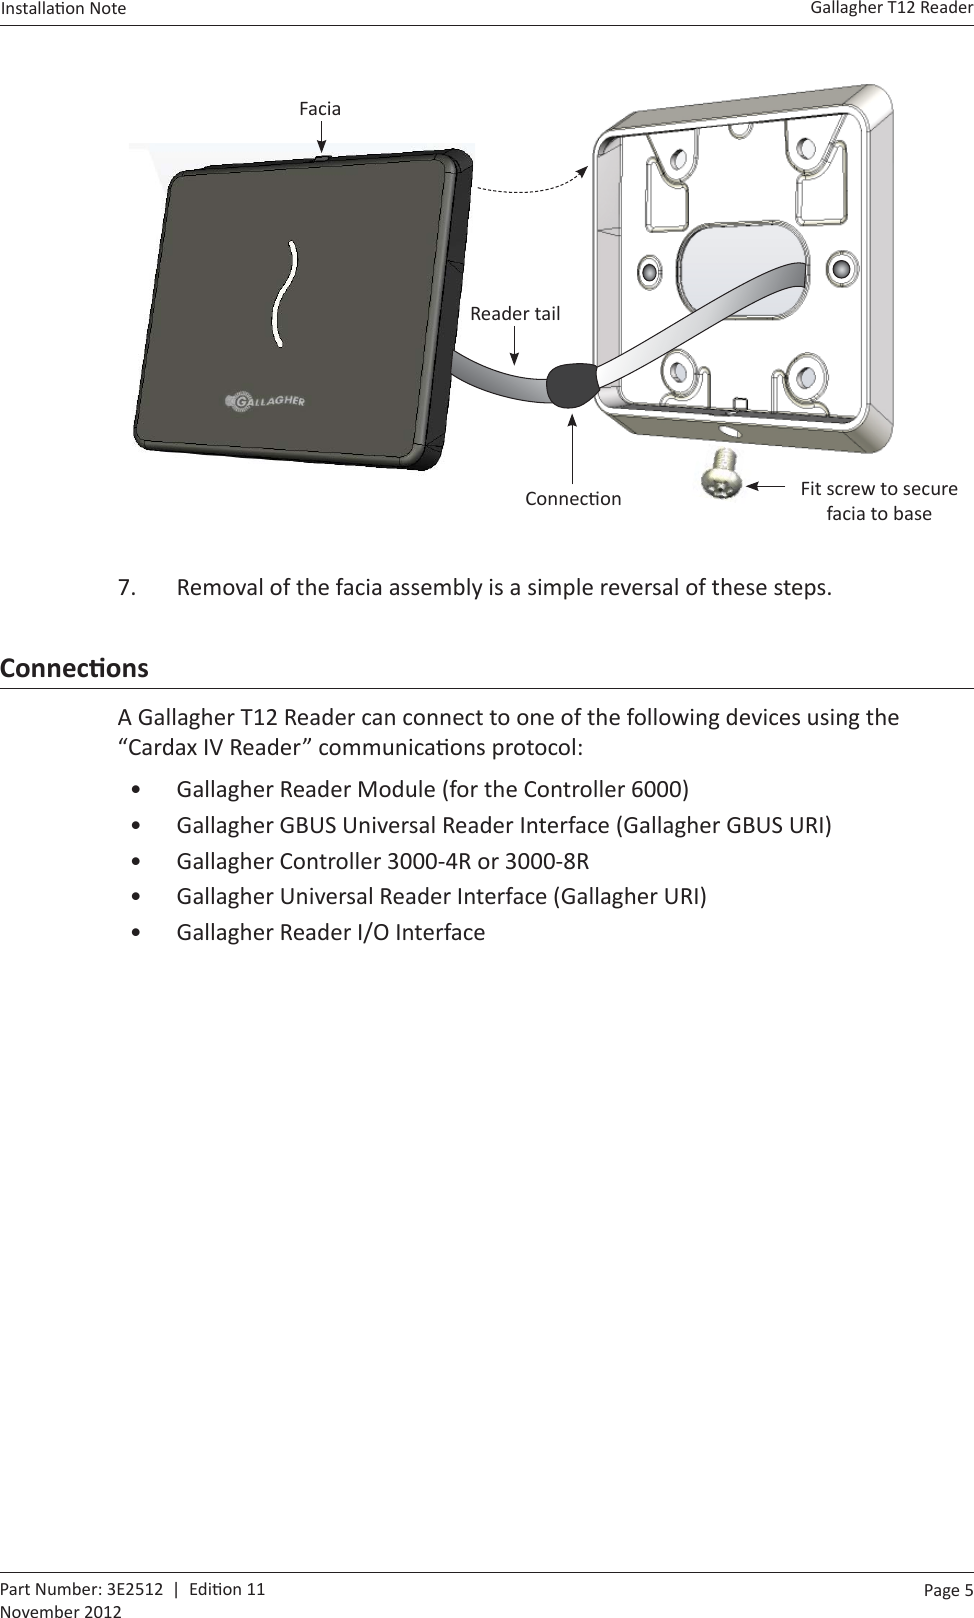 Page  5   Gallagher T12 ReaderInstalla on Note  Part Number: 3E2512  |  Edi on 11November 2012  Facia Reader tailConnec on Fit screw to secure facia to base7.  Removal of the facia assembly is a simple reversal of these steps.ConnecƟ onsA Gallagher T12 Reader can connect to one of the following devices using the “Cardax IV Reader” communica ons protocol:•  Gallagher Reader Module (for the Controller 6000)•  Gallagher GBUS Universal Reader Interface (Gallagher GBUS URI)•  Gallagher Controller 3000-4R or 3000-8R•  Gallagher Universal Reader Interface (Gallagher URI)•  Gallagher Reader I/O Interface